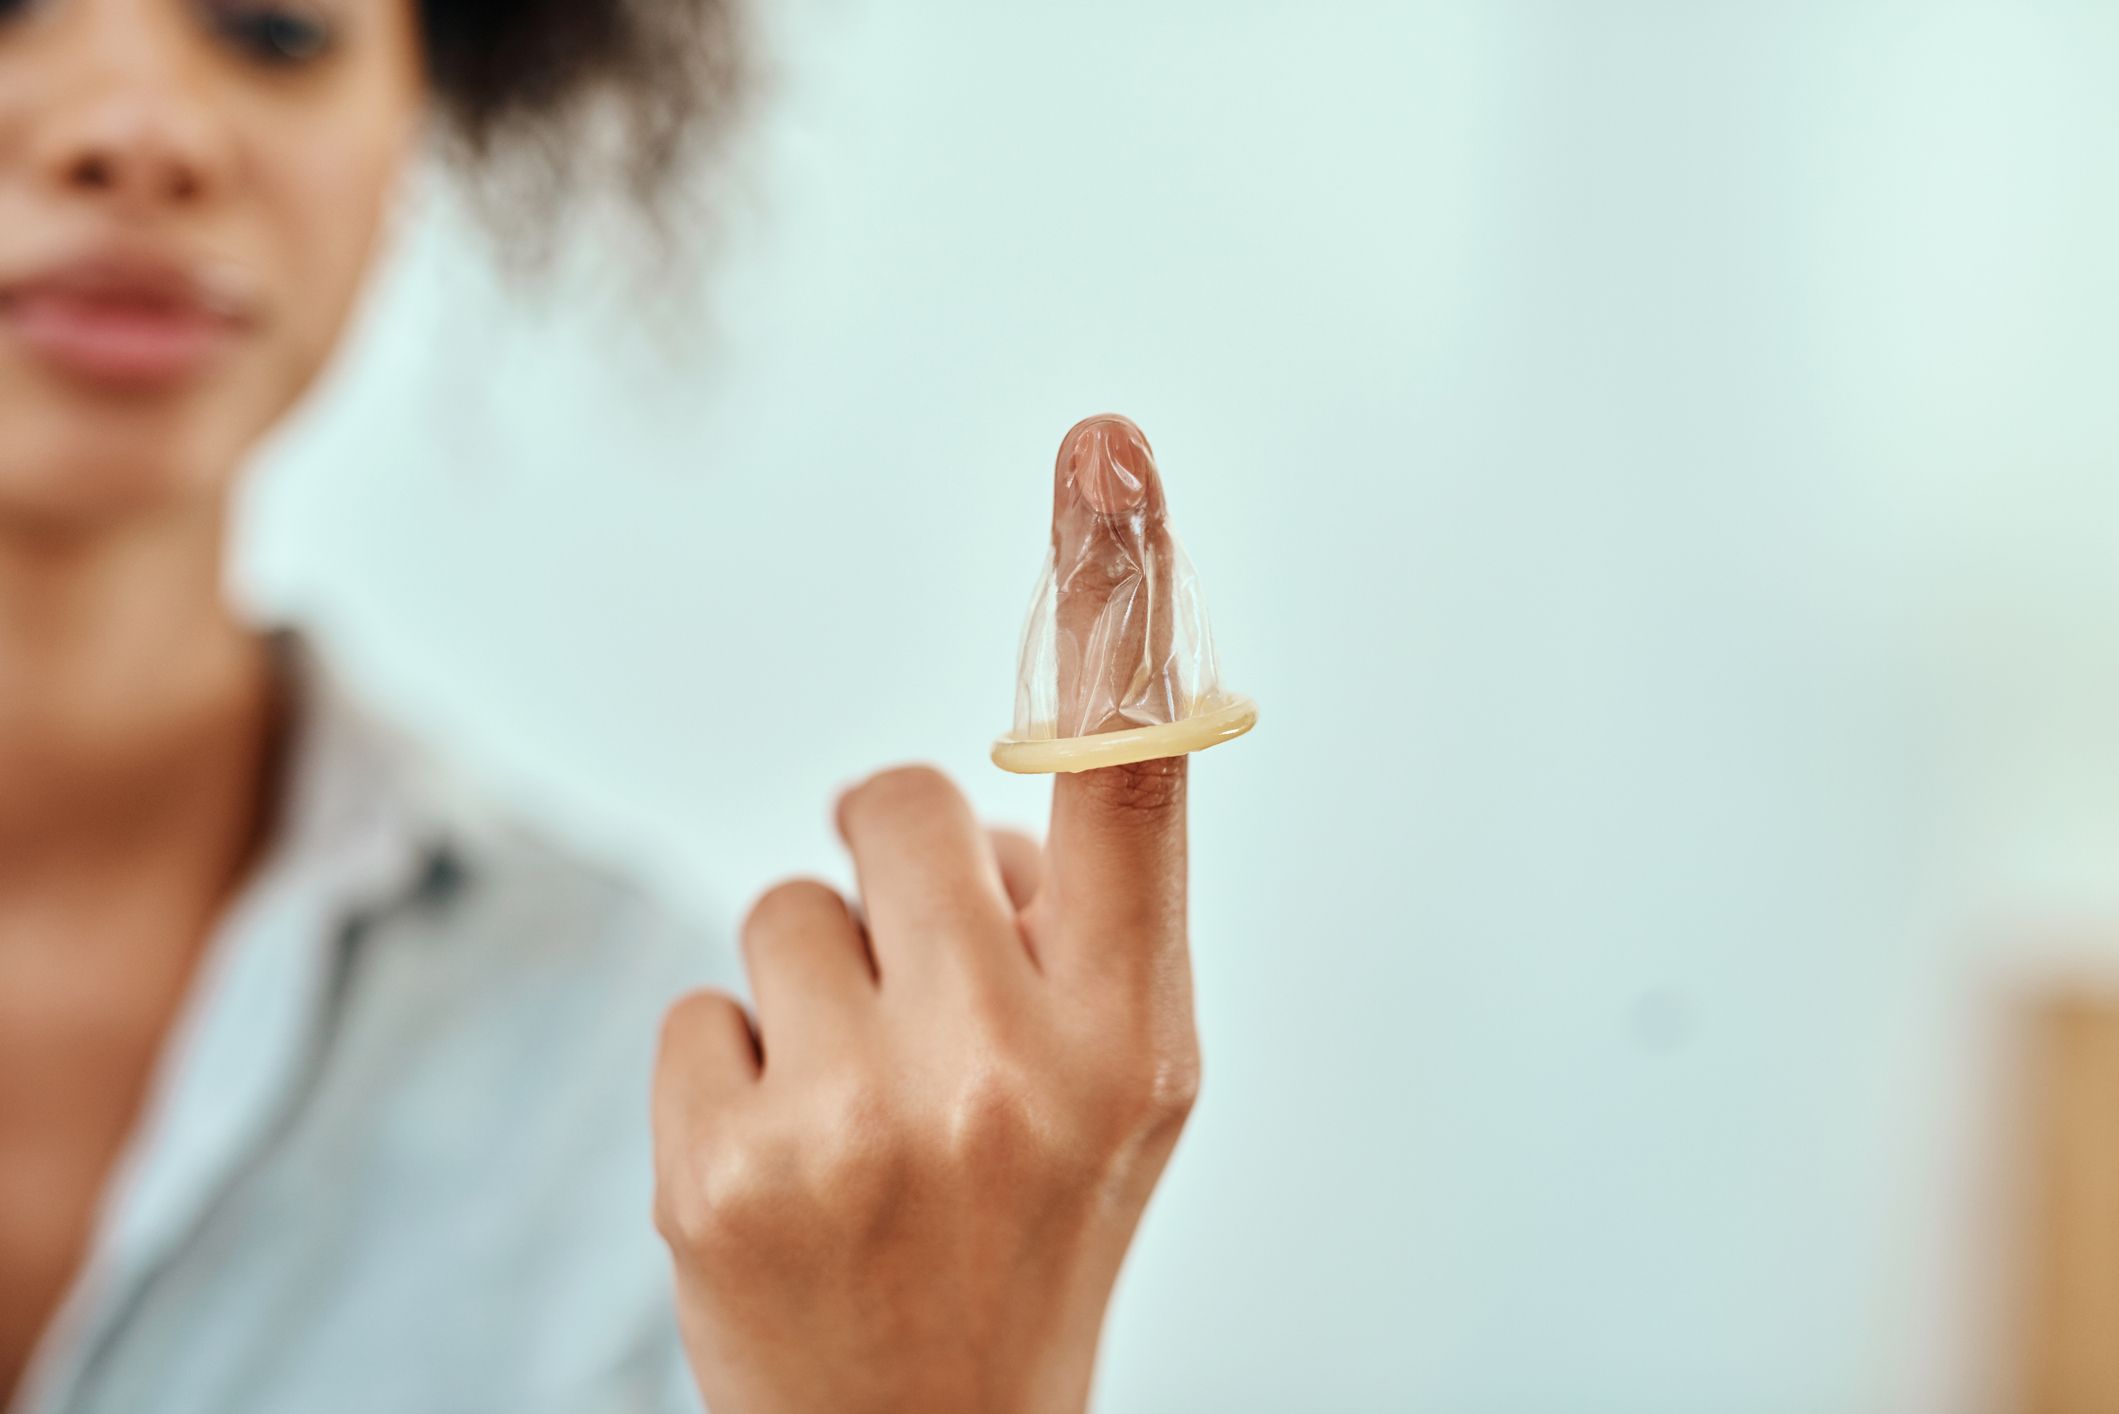 What Is a Finger Condom? image picture